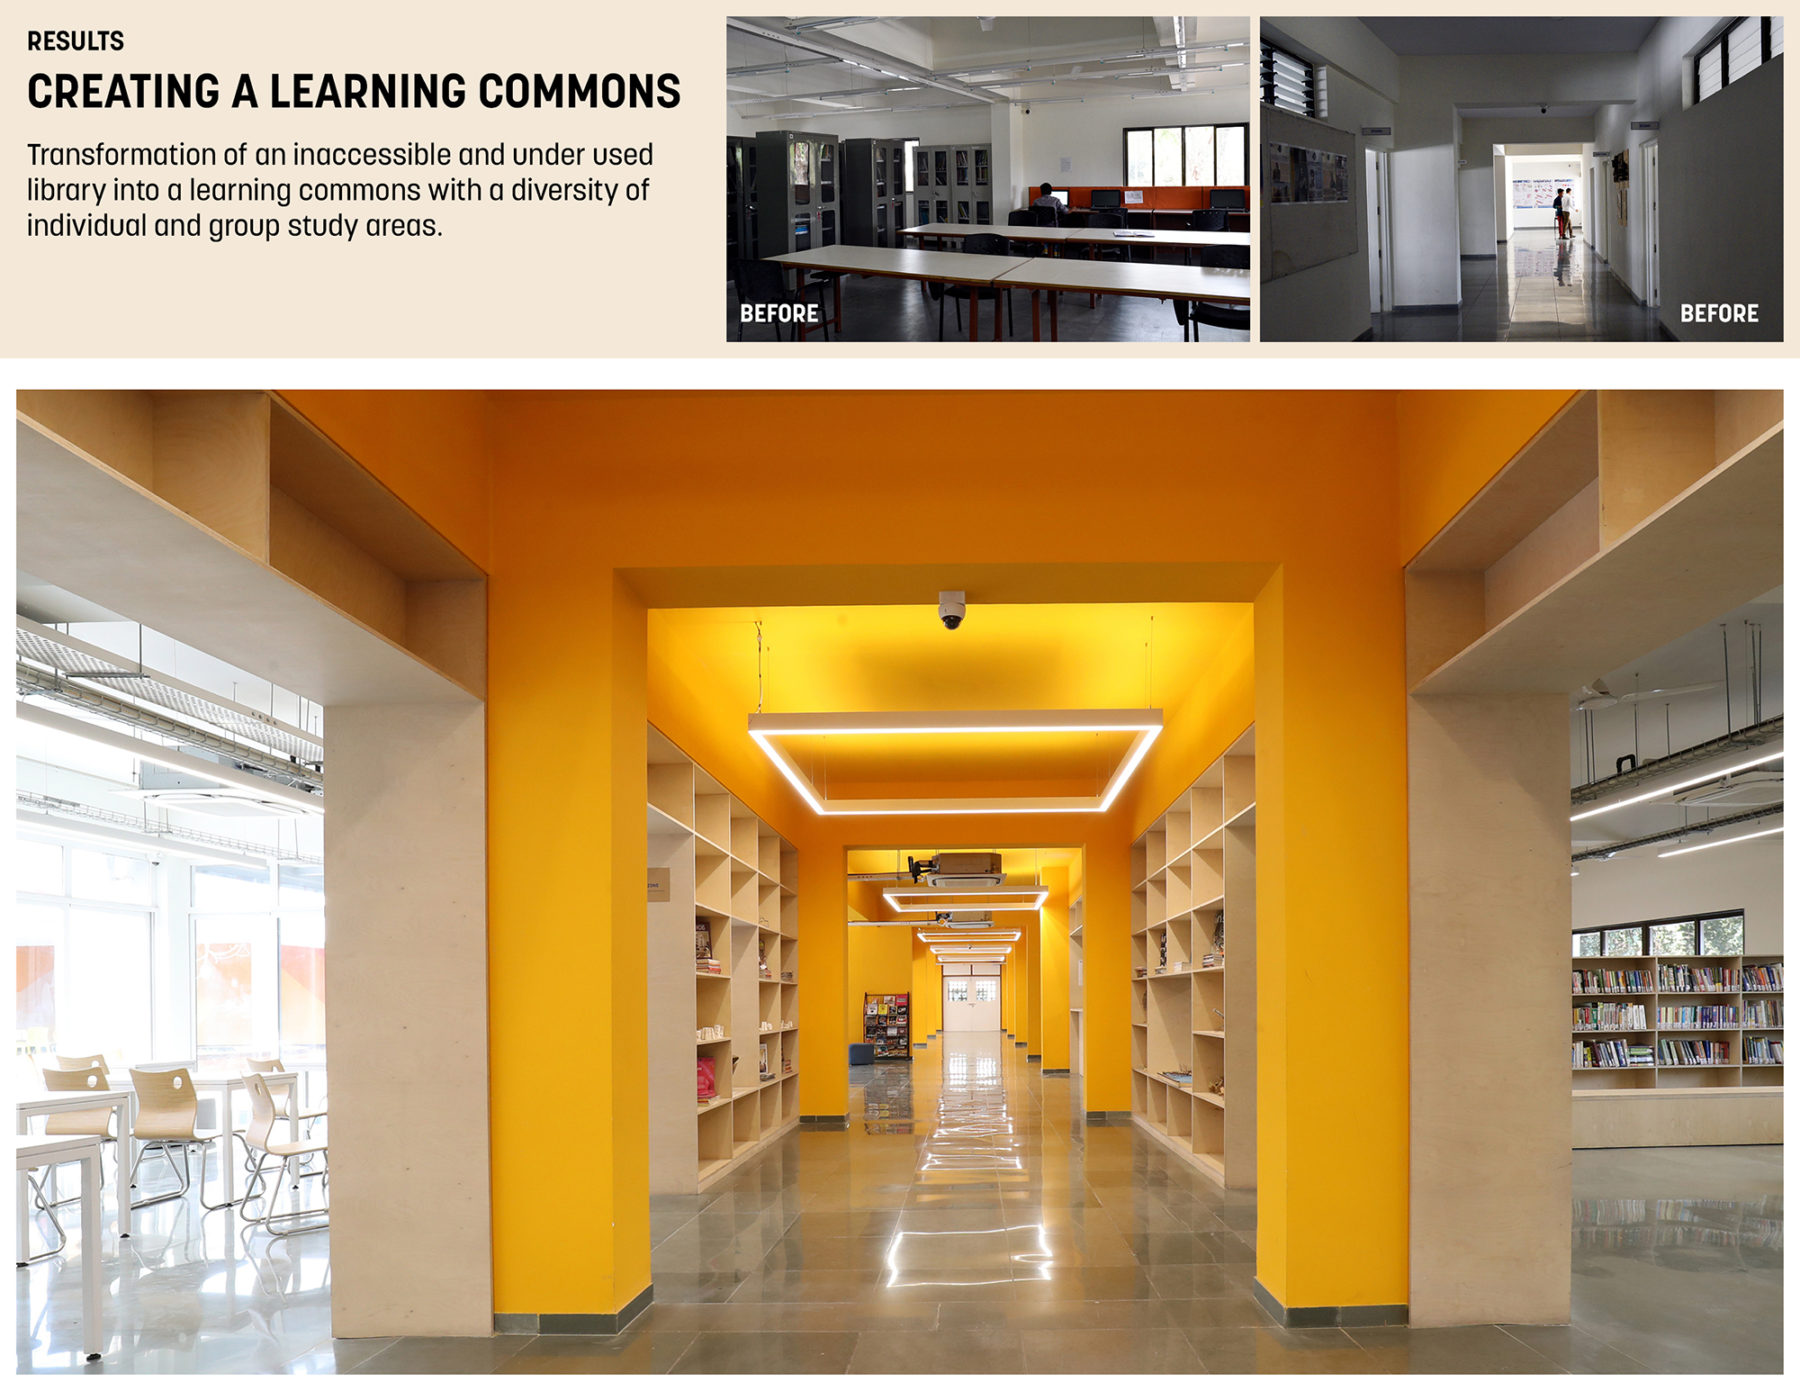 transformation of the learning commons at Anant, with images of transformation